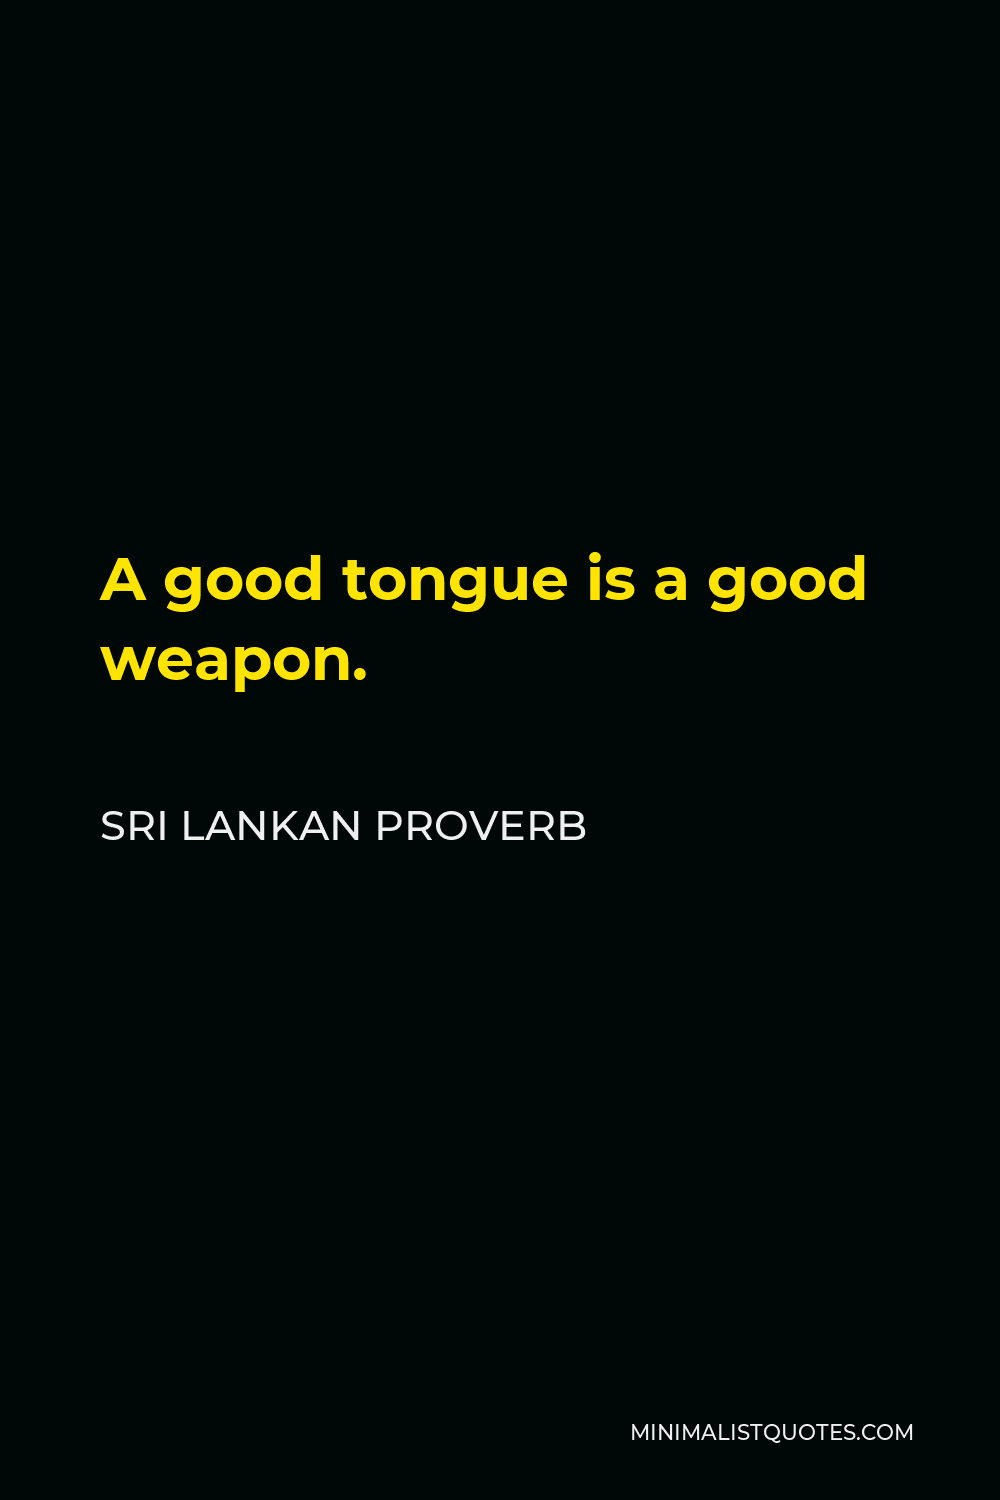 Sri Lankan Proverb Quote - A good tongue is a good weapon.